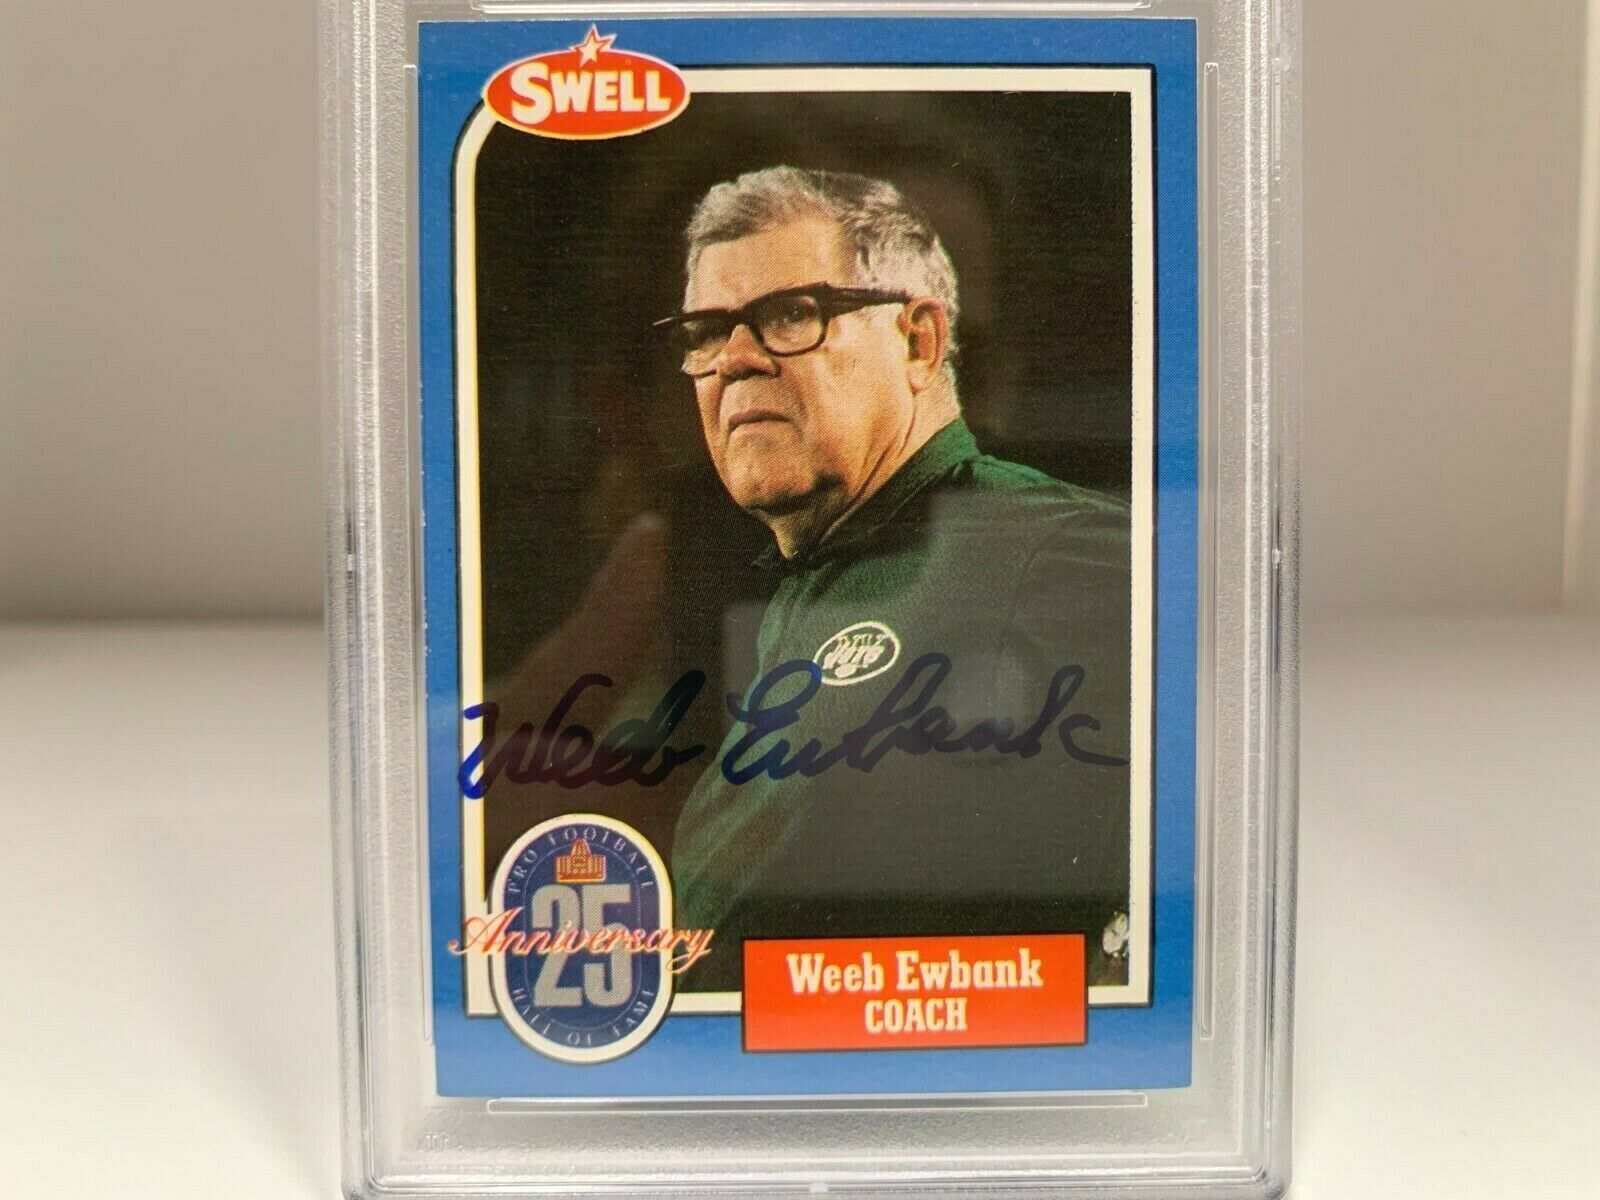 Weeb Ewbank HOF Jets Coach Autographed Signed Swell Card PSA Certified Slabbed